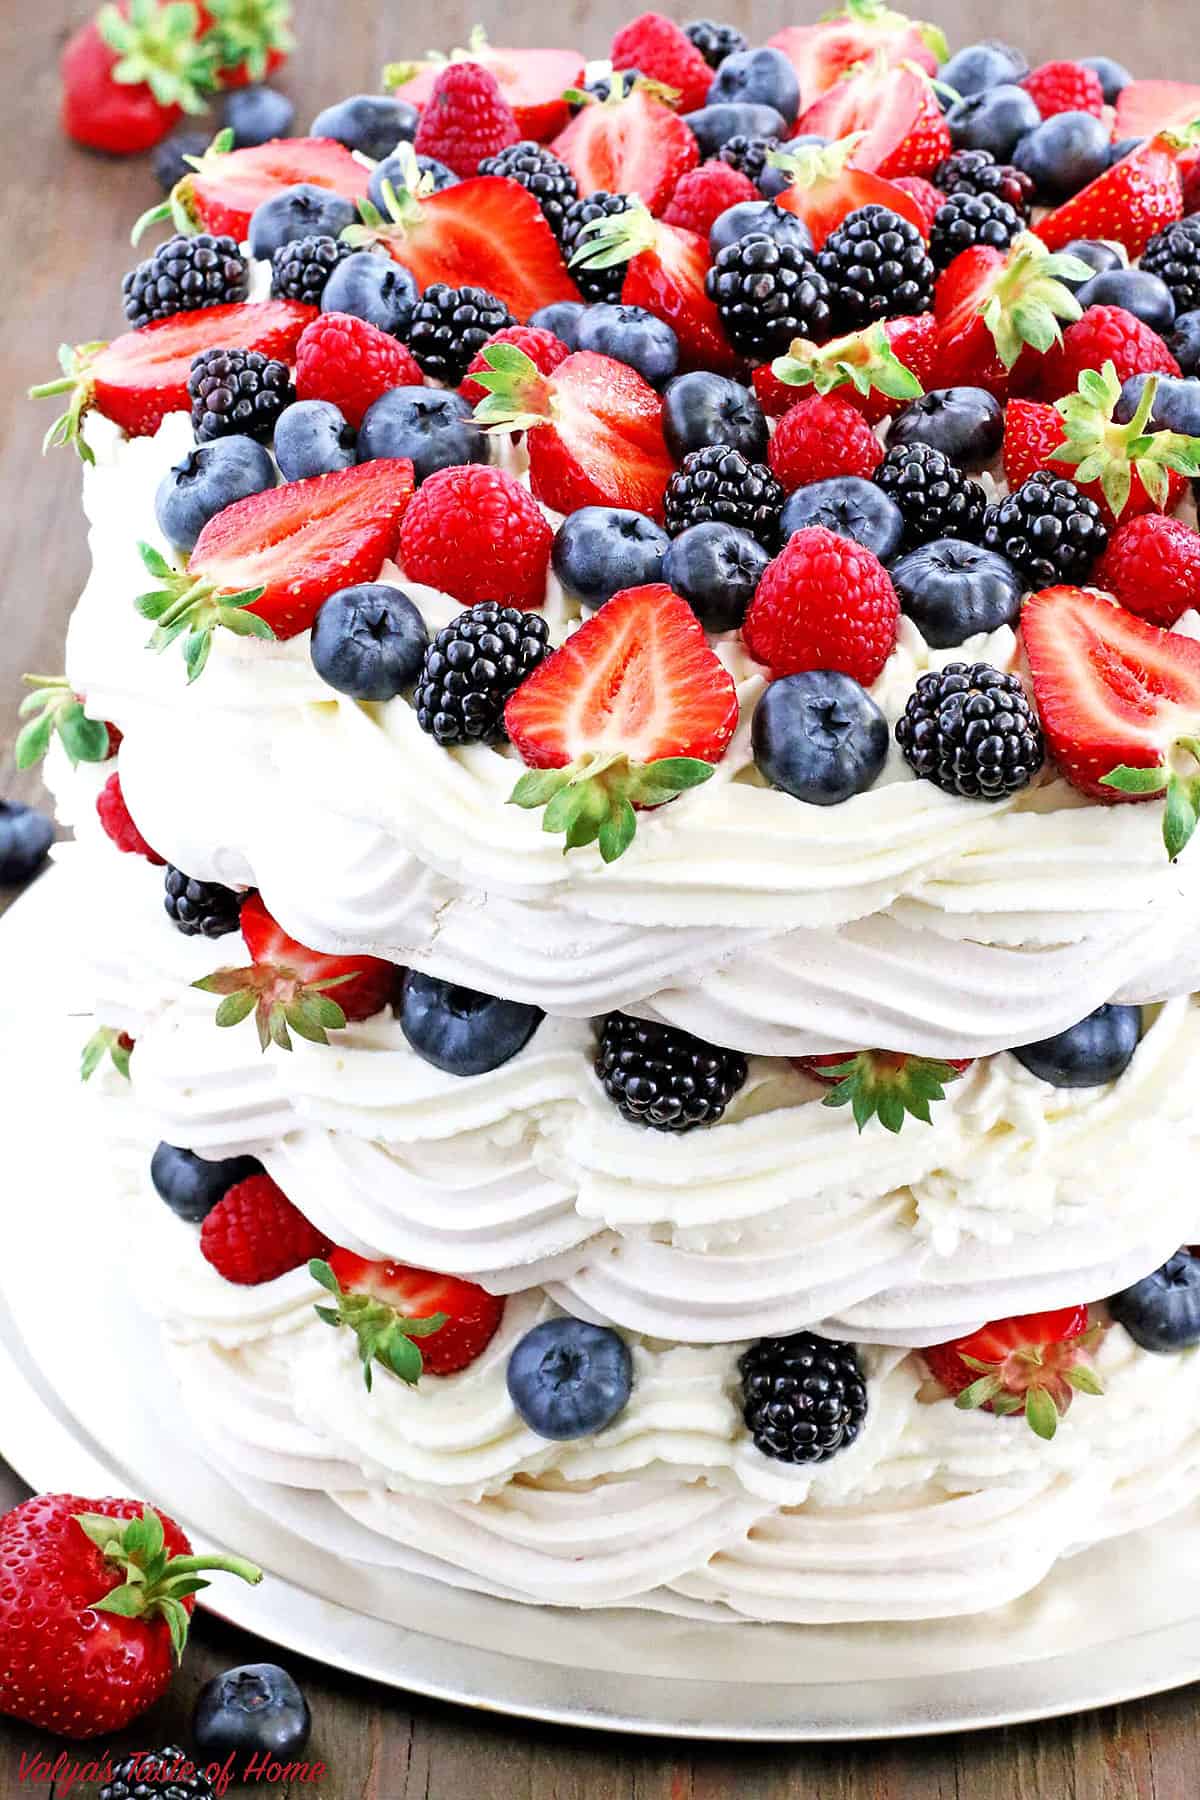 Boccone Dolce, also known as 'Sweet Mouthful,' is a traditional Italian dessert that is perfect for any occasion. It is a delicious, light, and airy dessert that combines meringue, whipped cream, and fresh berries.